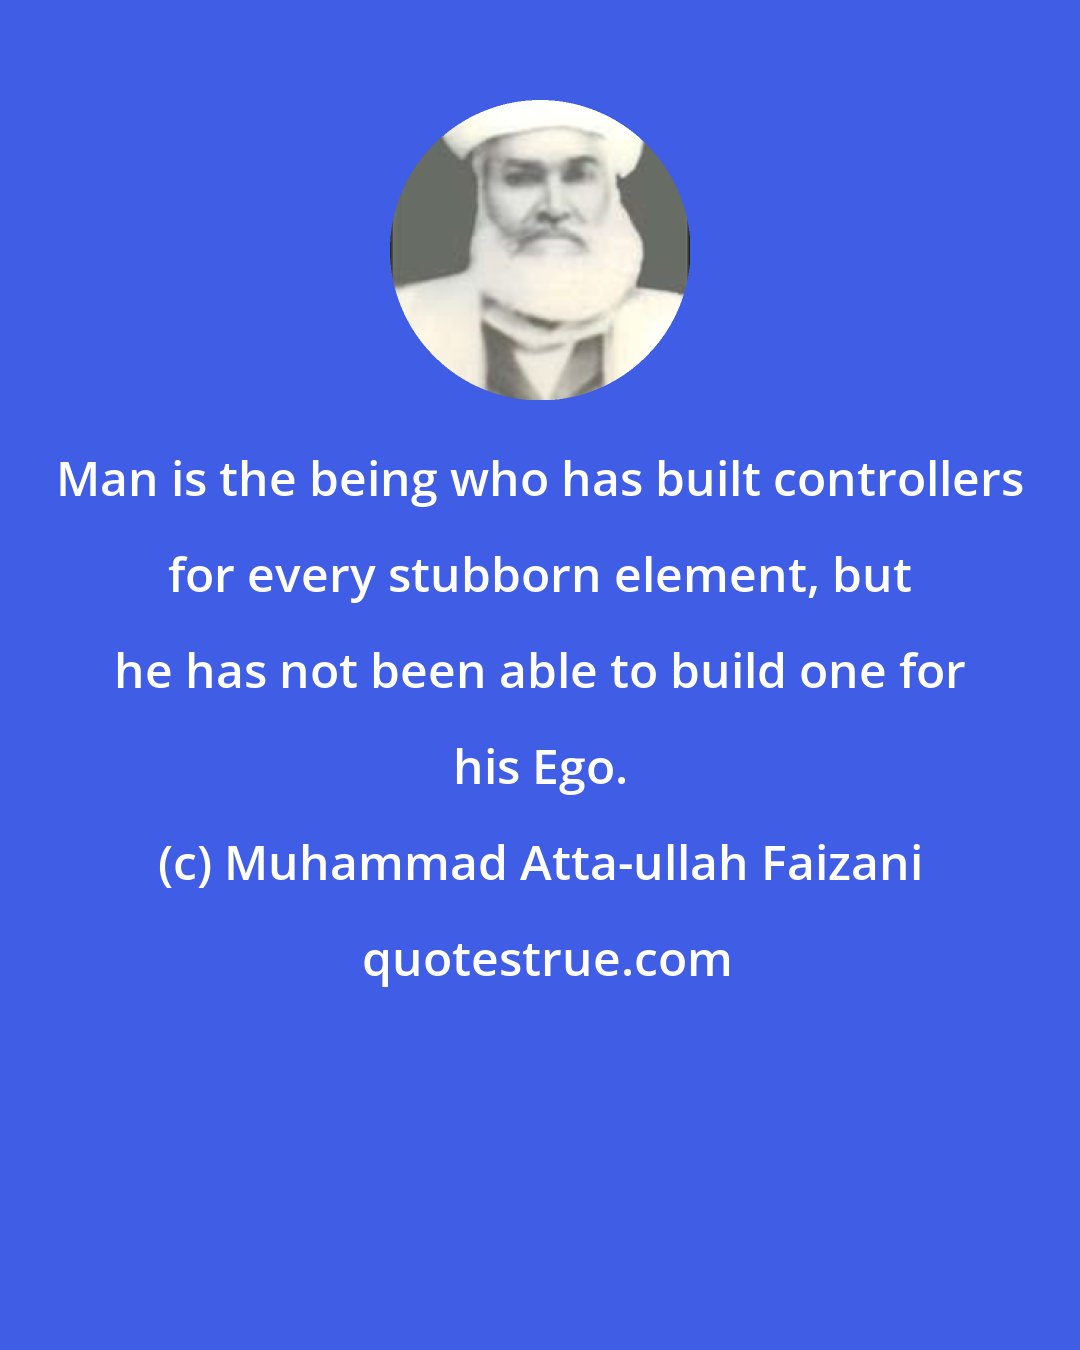 Muhammad Atta-ullah Faizani: Man is the being who has built controllers for every stubborn element, but he has not been able to build one for his Ego.